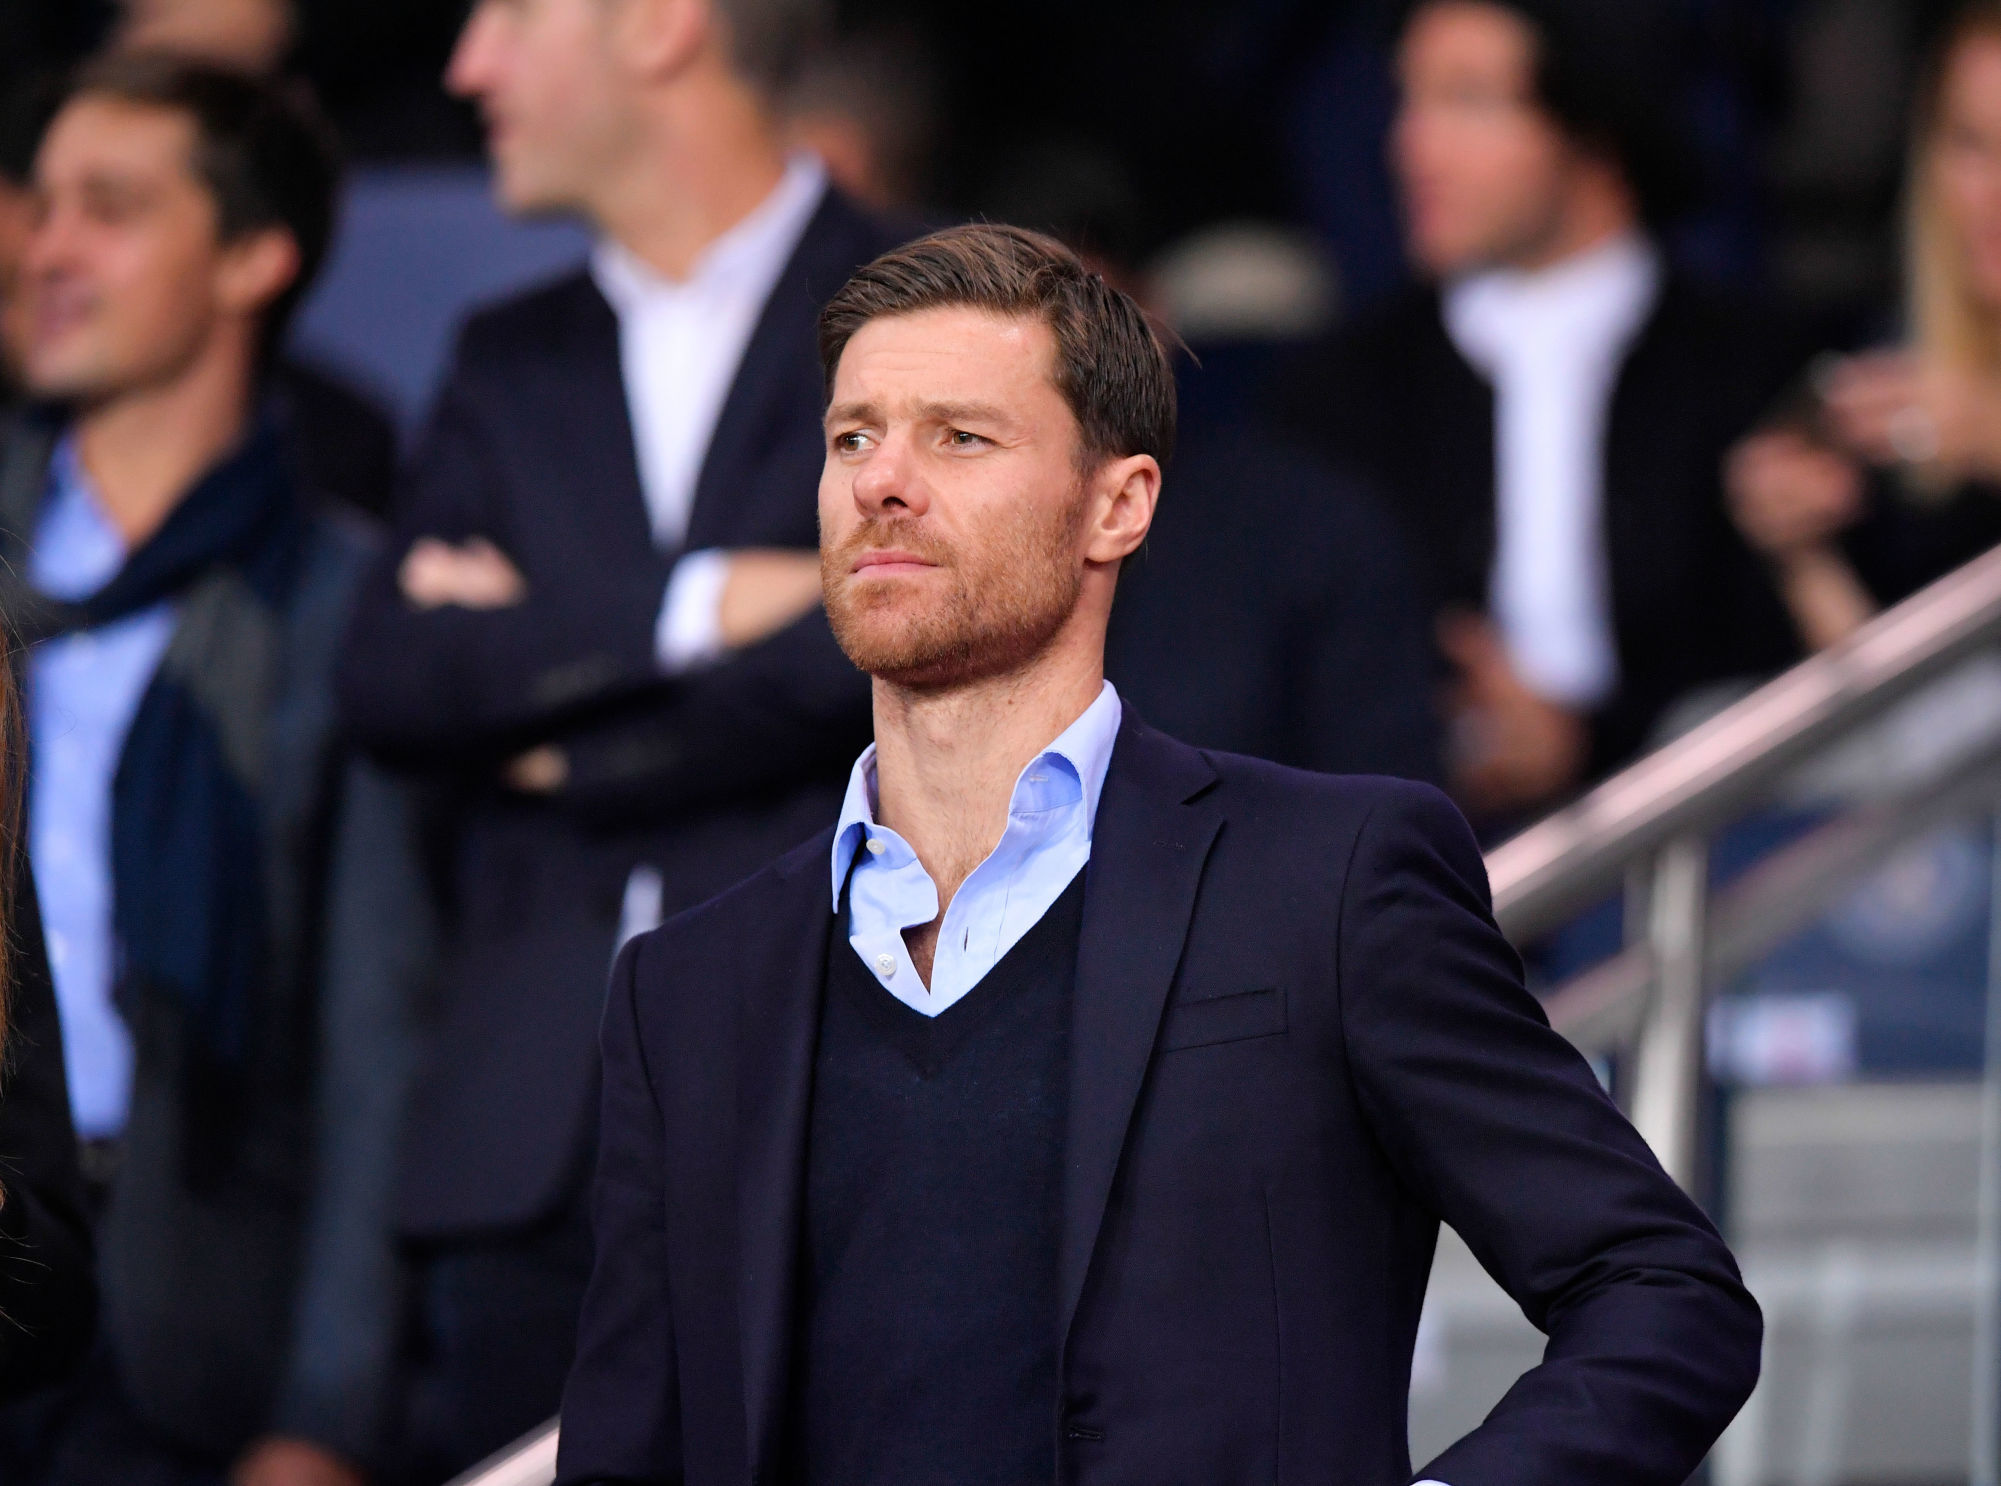 Xabi Alonso during the Champions League match between Paris Saint Germain and Bayern Munich on 27th September 2017 Photo : Mis / Icon Sport